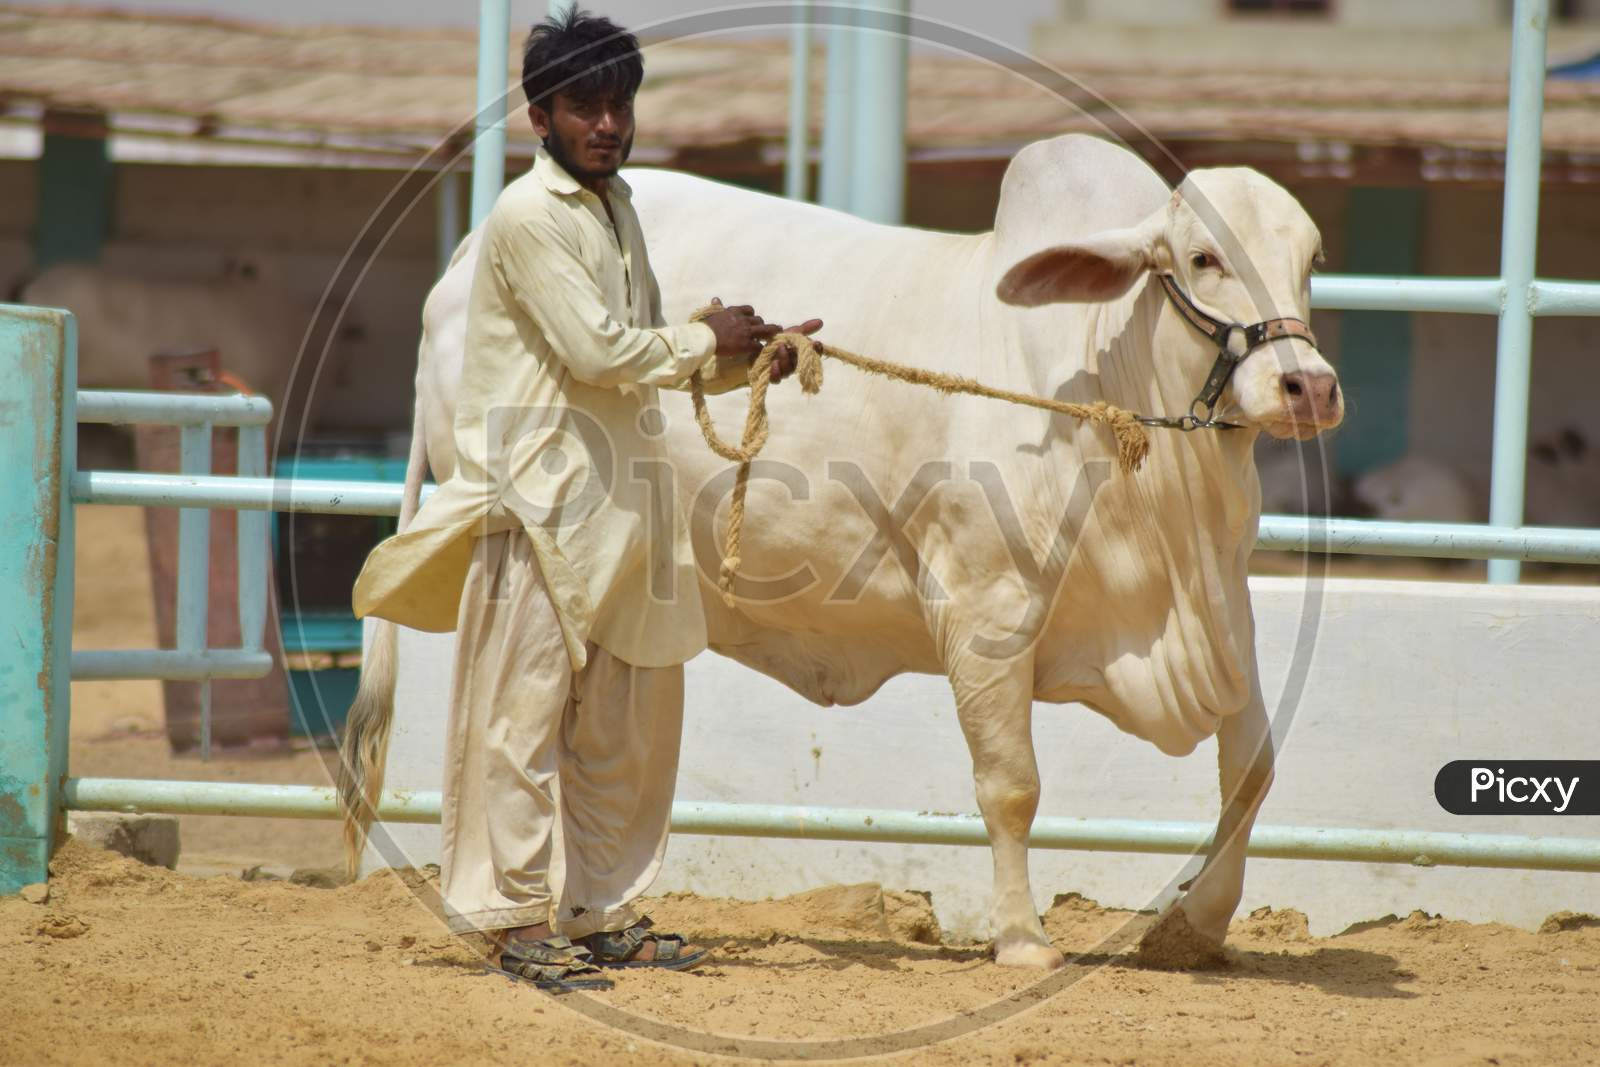 A Man with a White Bull in the Cattle Farm